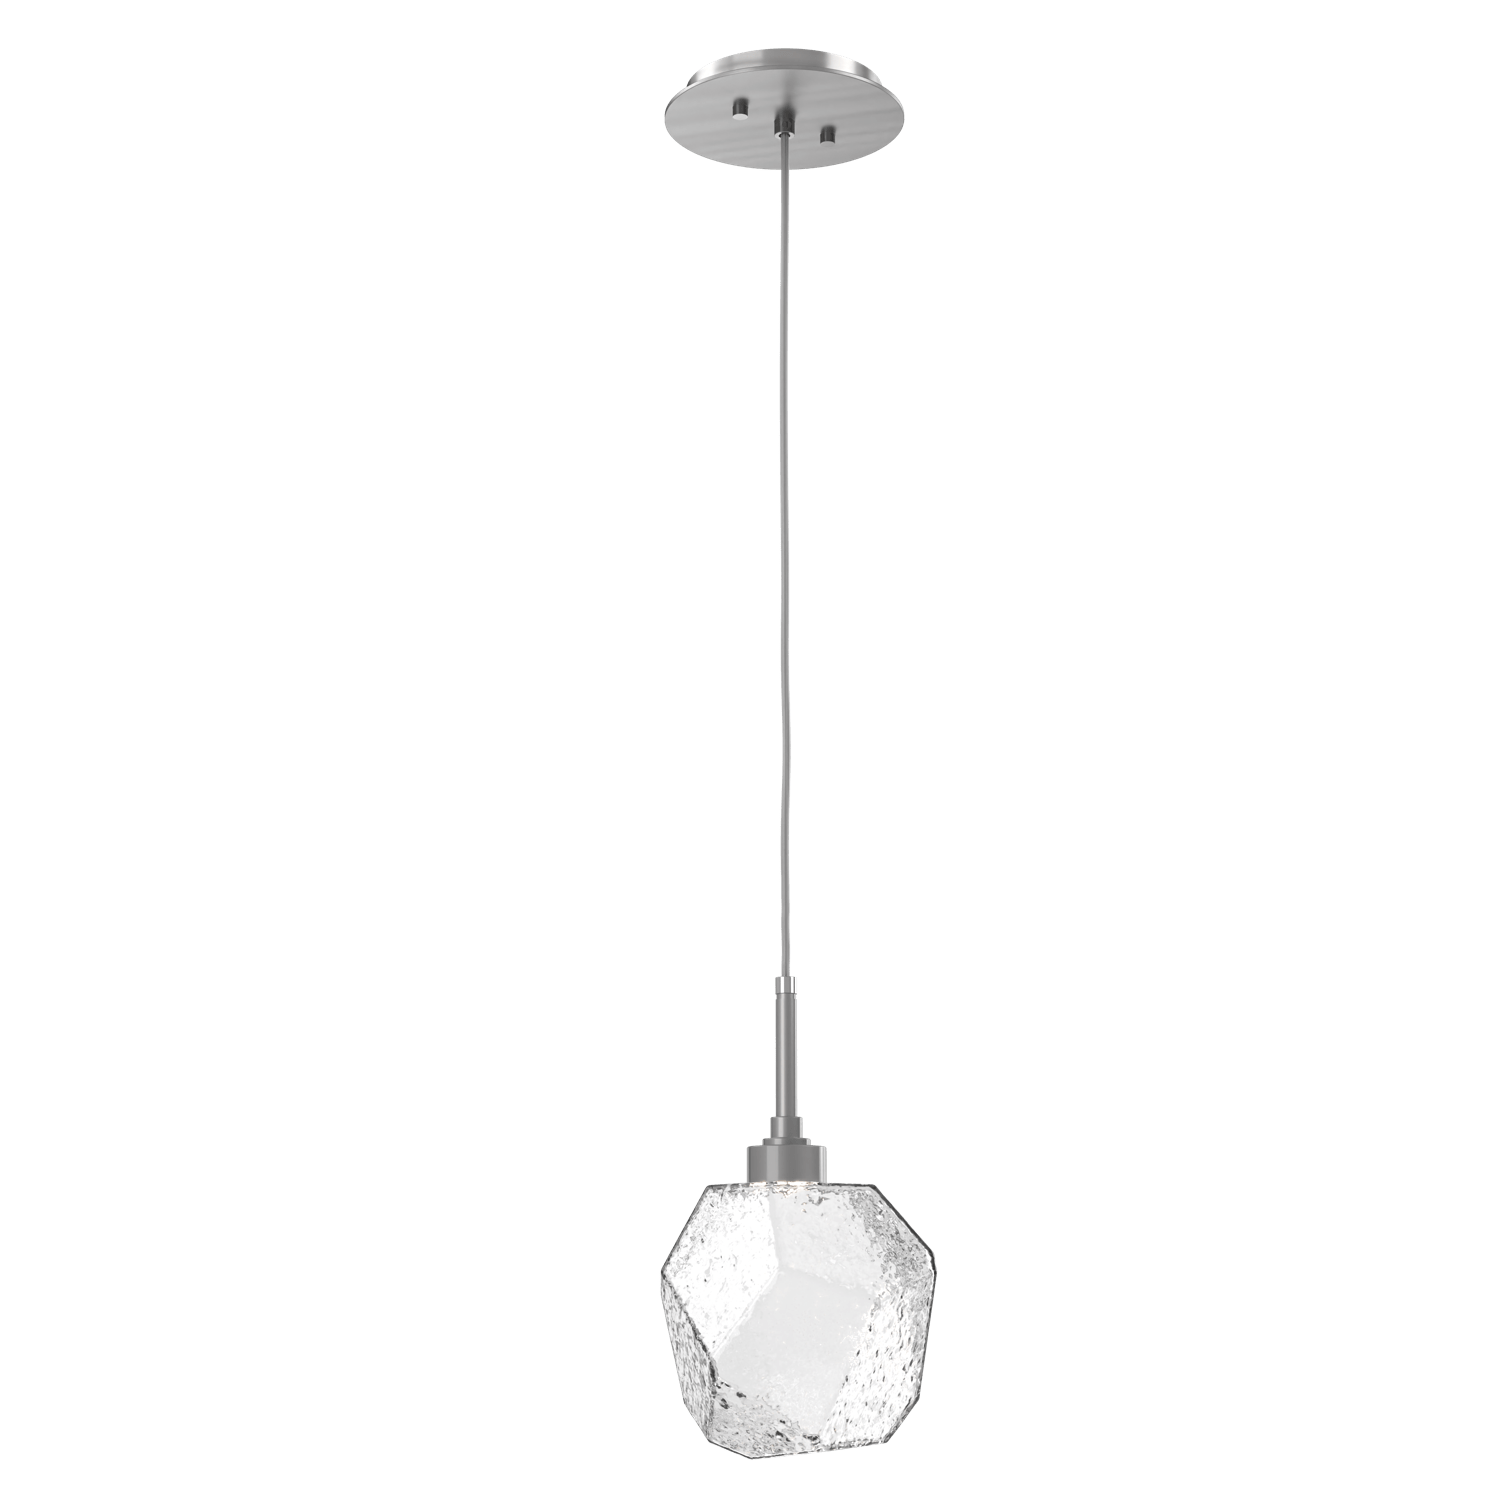 LAB0039-01-SN-C-Hammerton-Studio-Gem-pendant-light-with-satin-nickel-finish-and-clear-blown-glass-shades-and-LED-lamping